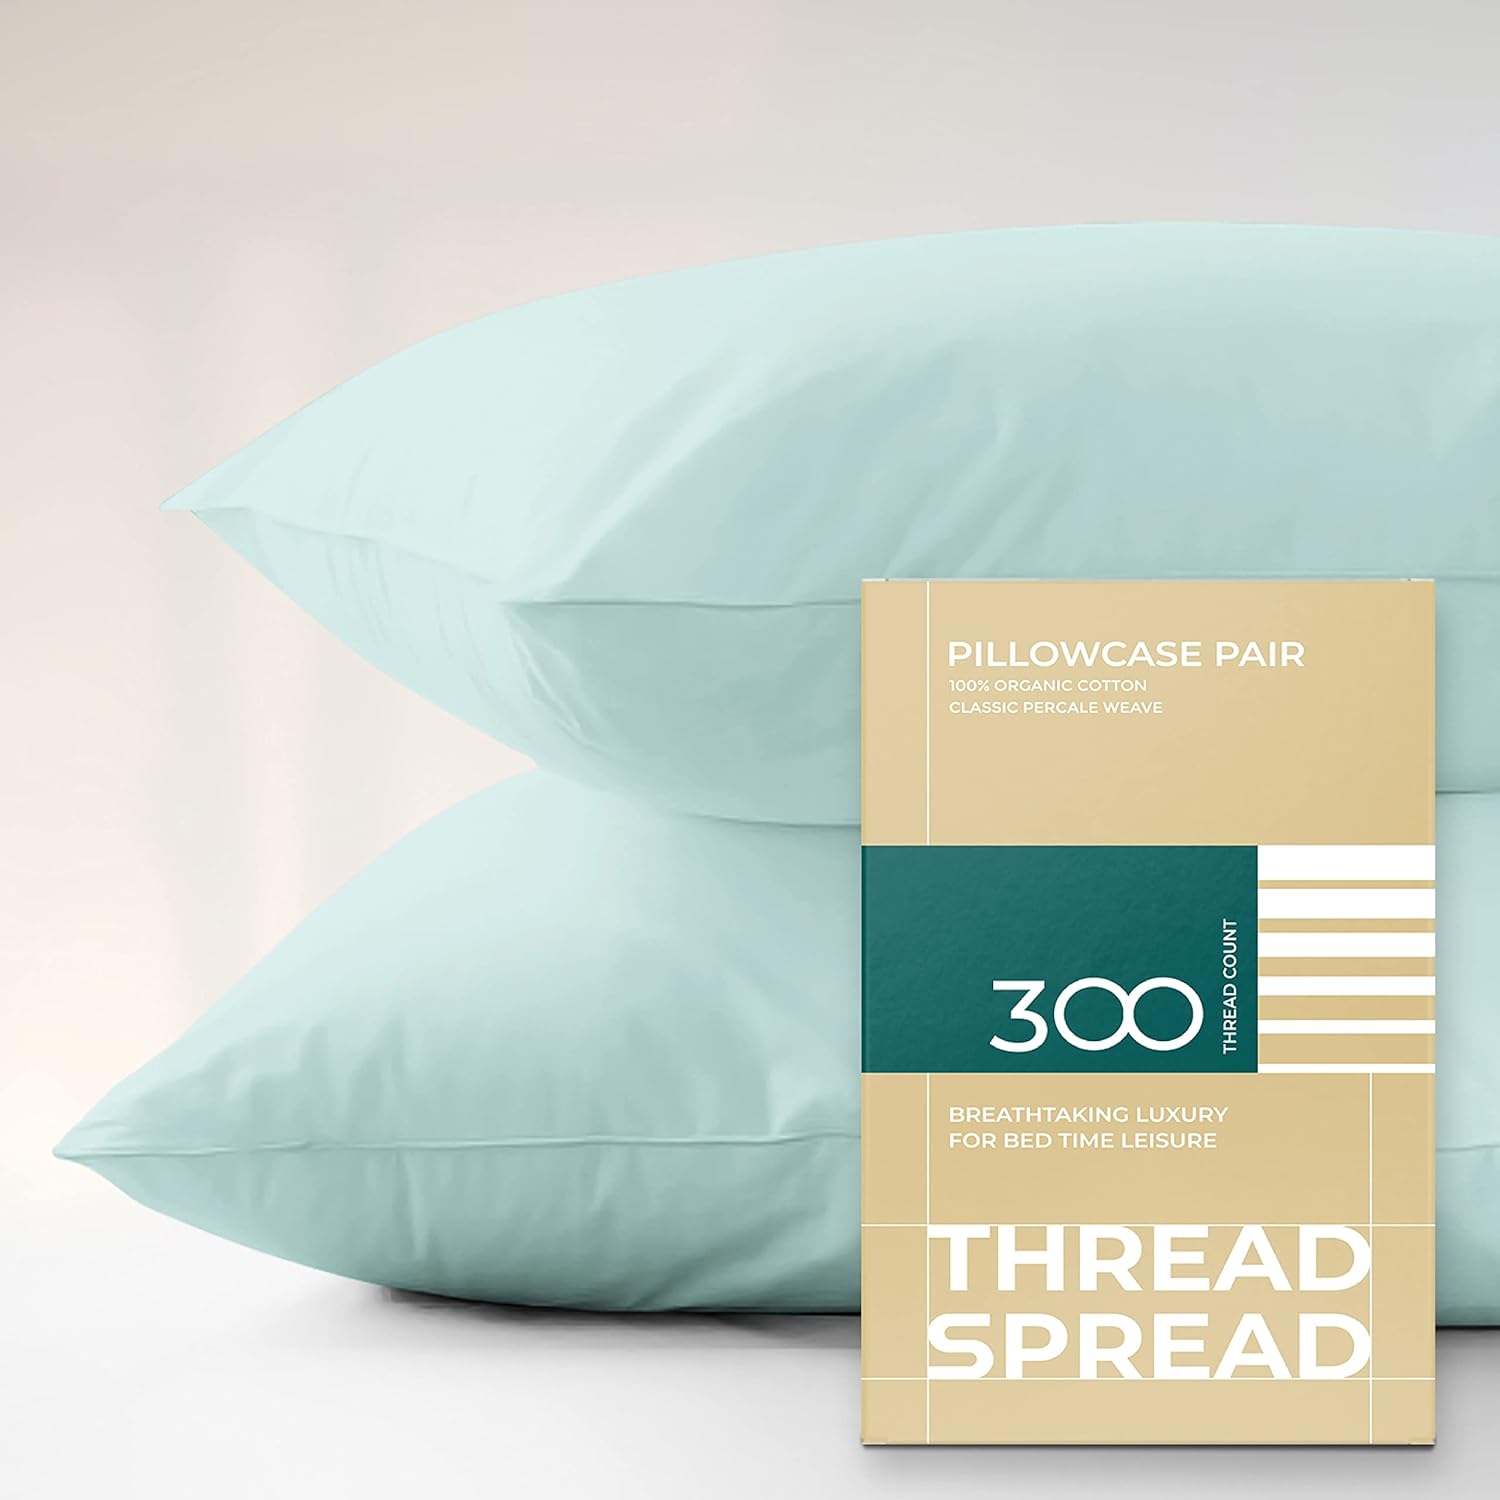 THREAD SPREAD 100% Organic Cotton Pillowcases - Soft and Crisp, Cooling Percale Weave, Breathable Pillow Covers, Set of 2 (Queen Size, Pistachio Green)